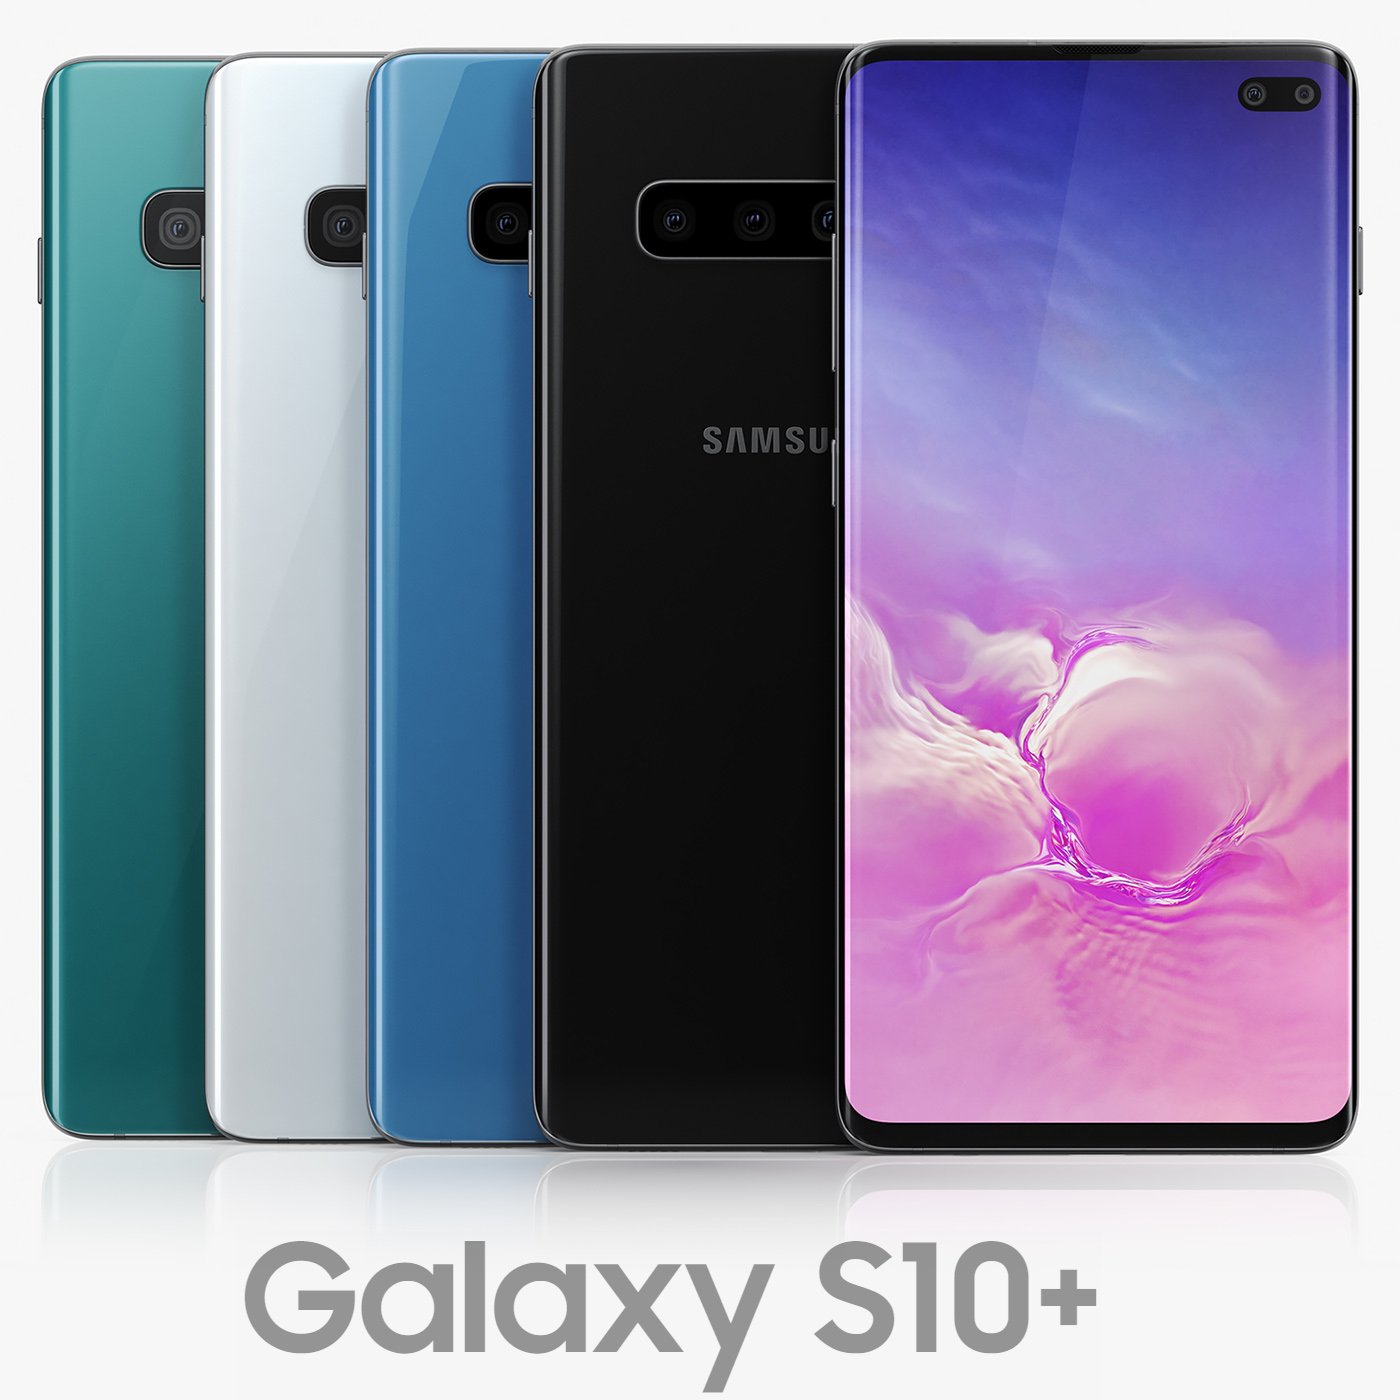 Samsung Galaxy S10+ plus Specifications Features and Price